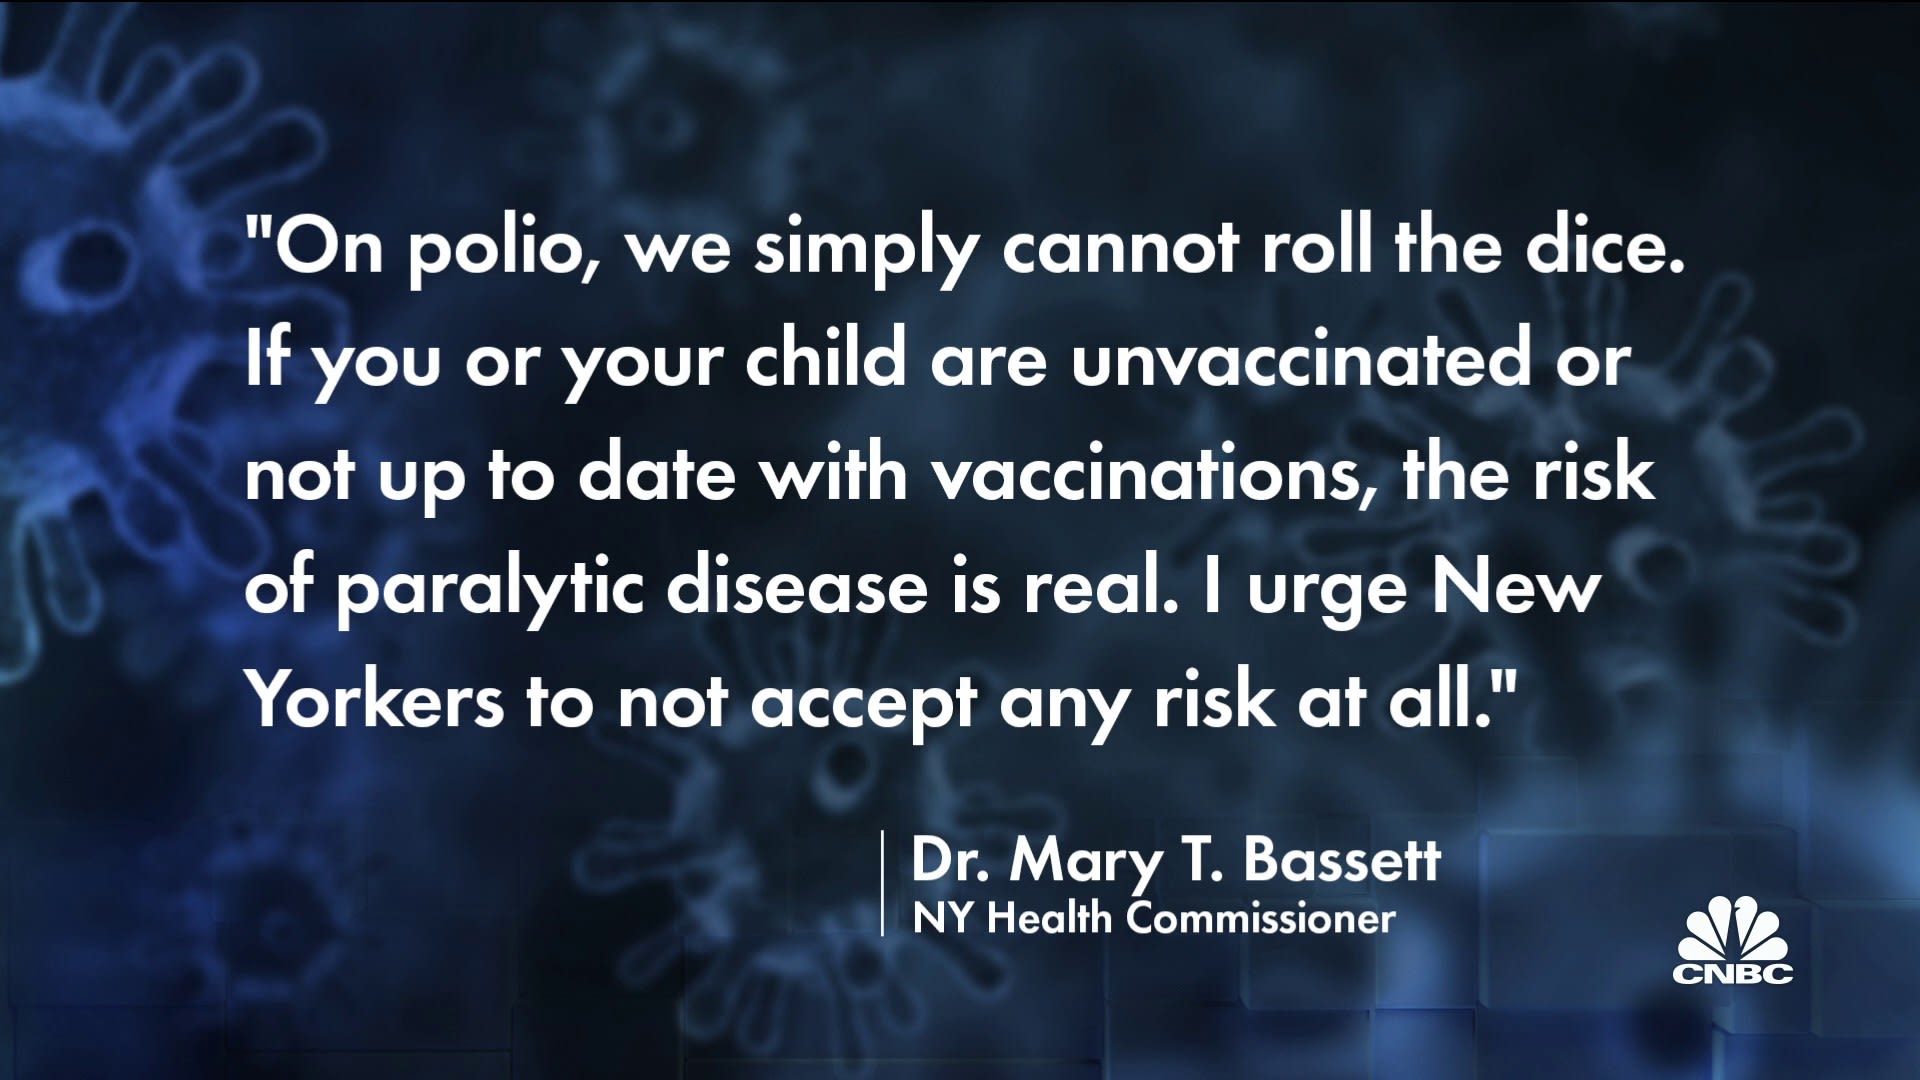 New York declares state of emergency over polio to boost low vaccination rates (cnbc.com)